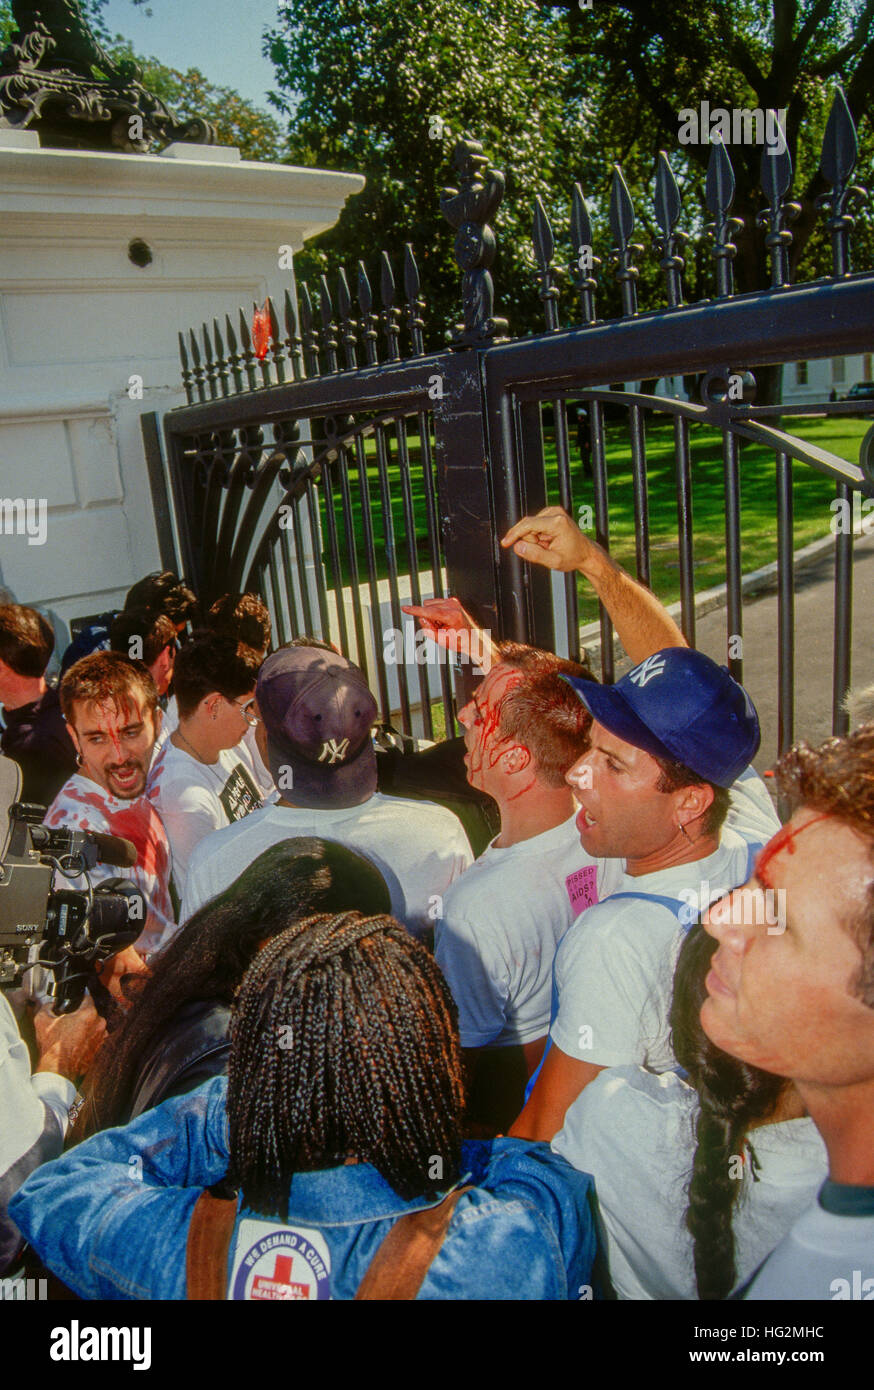 Washington, DC., USA, 30th September, 1991, Protesters from the group 'ACT UP' chain themselves to the fence at the Northwest Gate of the White House in protest to the lack of funding for research into a cure for the AIDS/HIV virus Credit: Mark Reinstein Stock Photo